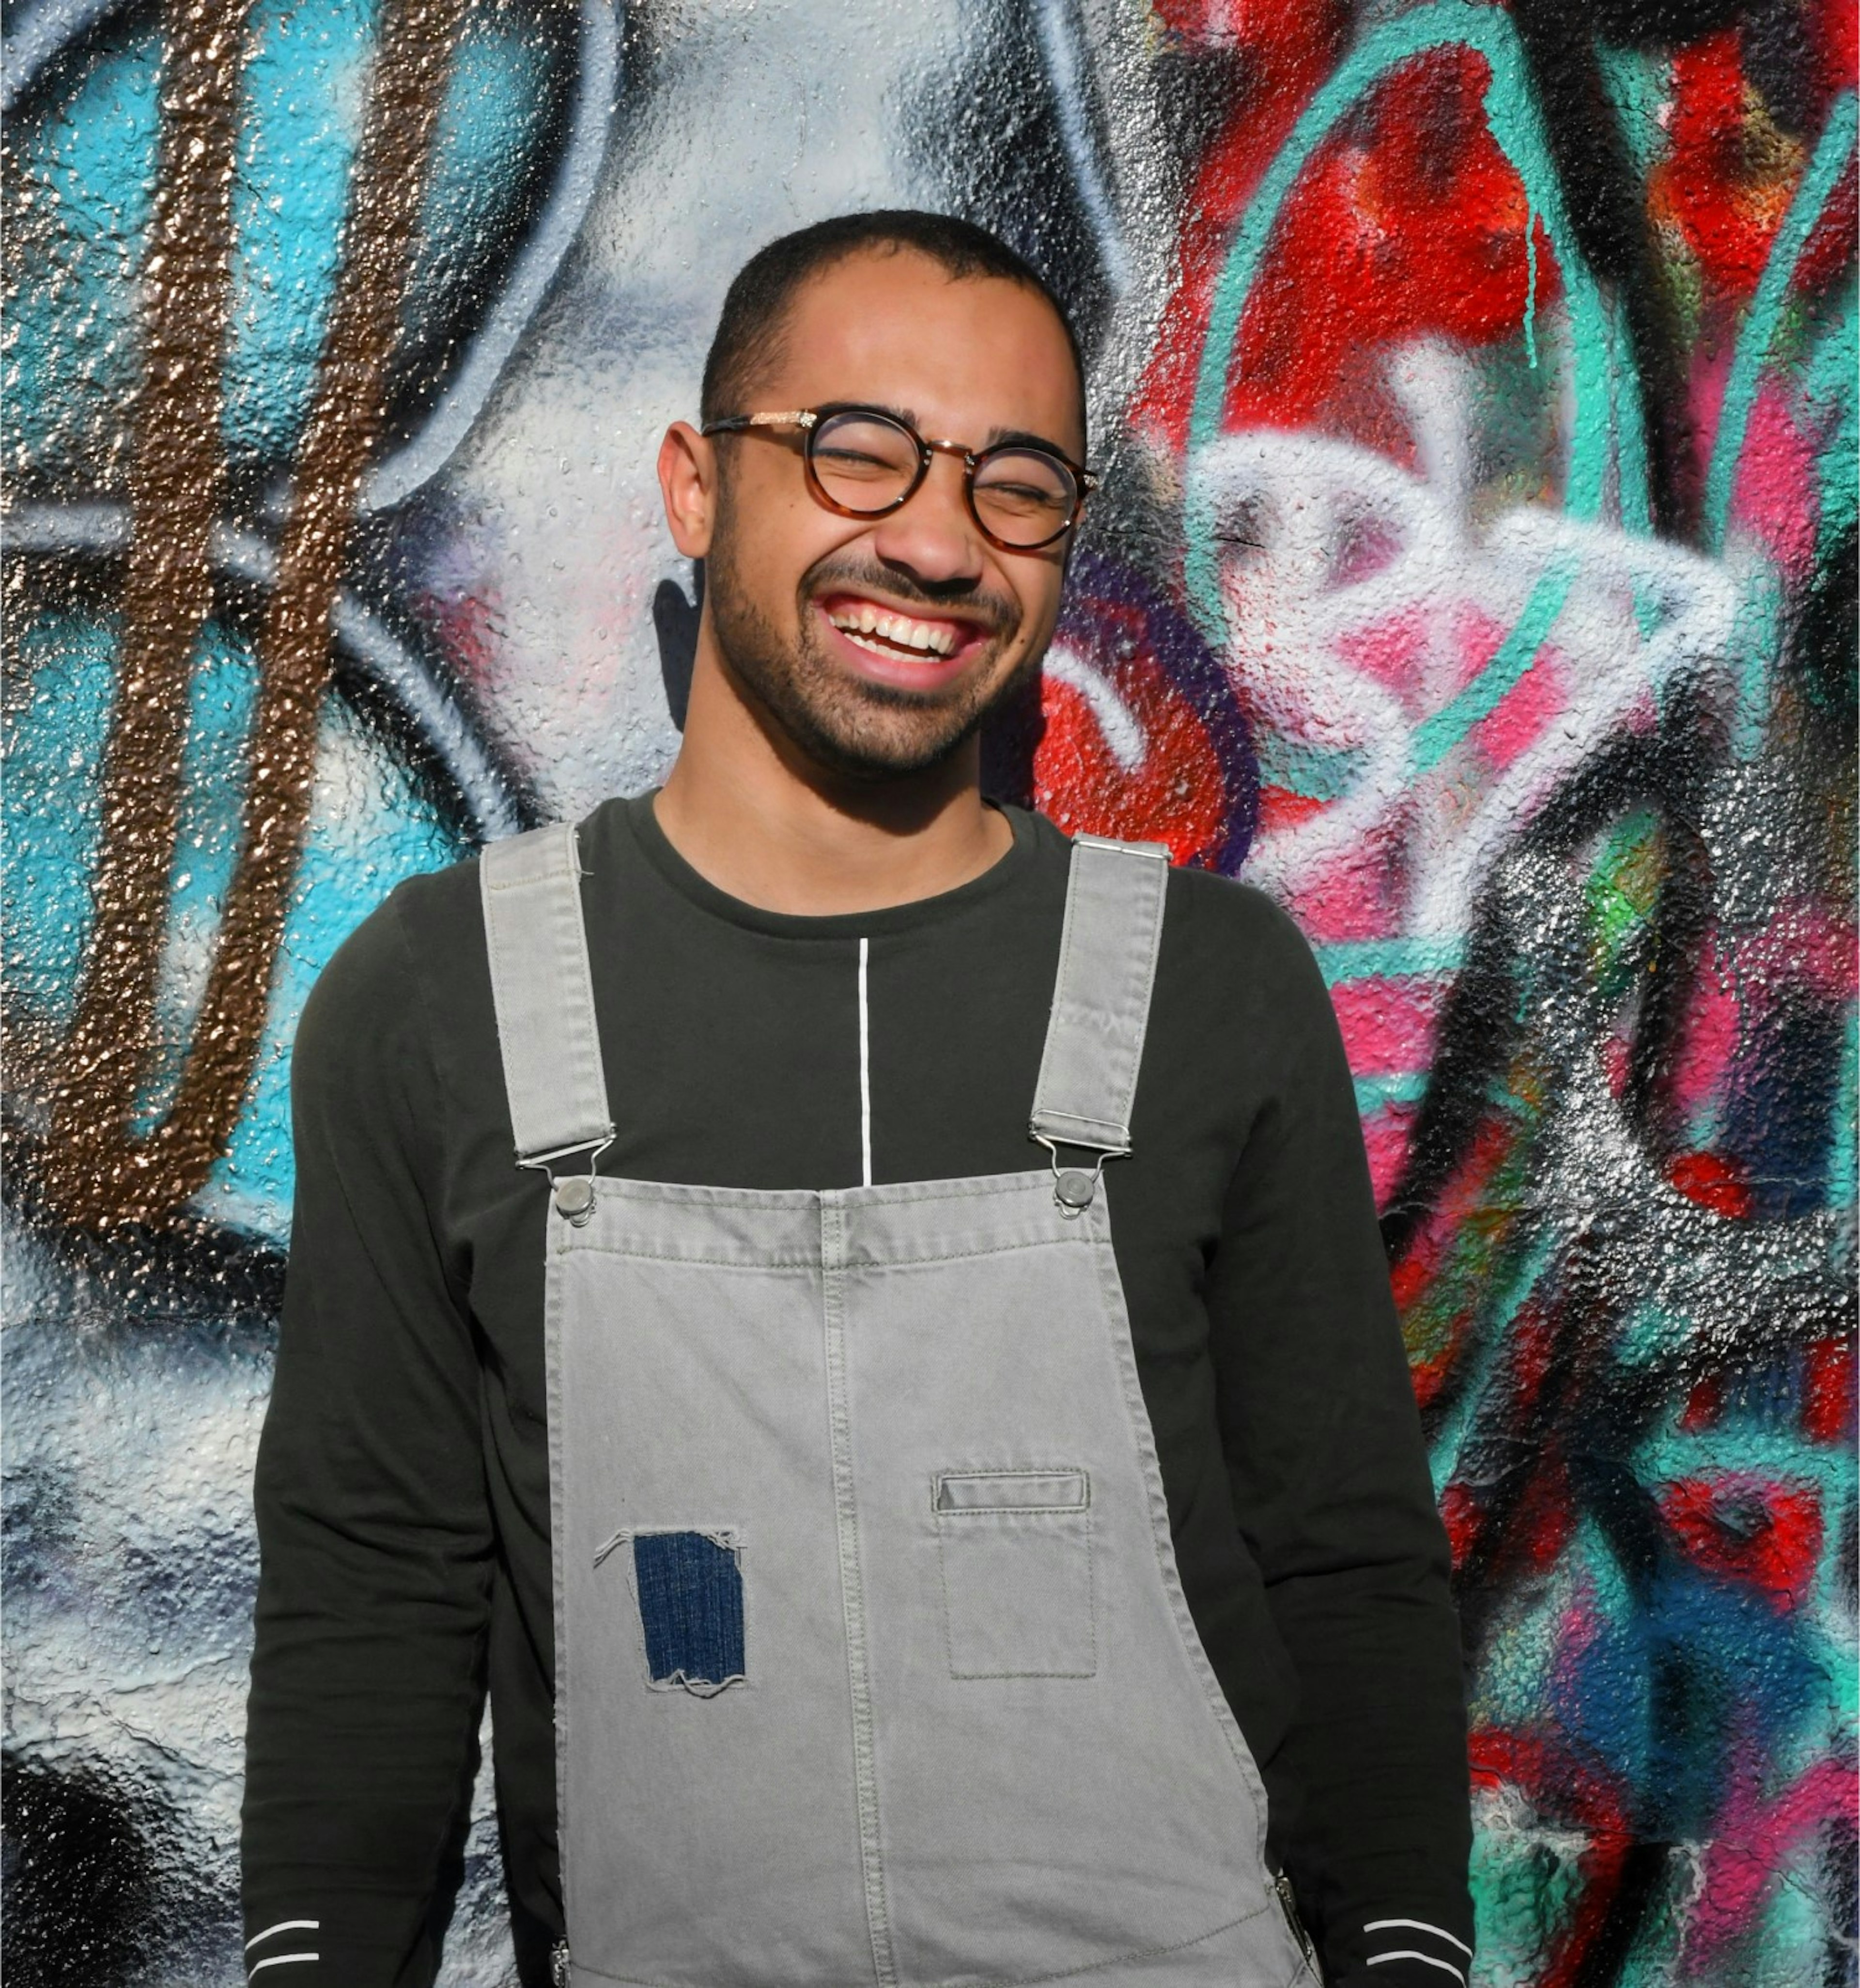 Happy man with overalls standing in front of a colorful wall.